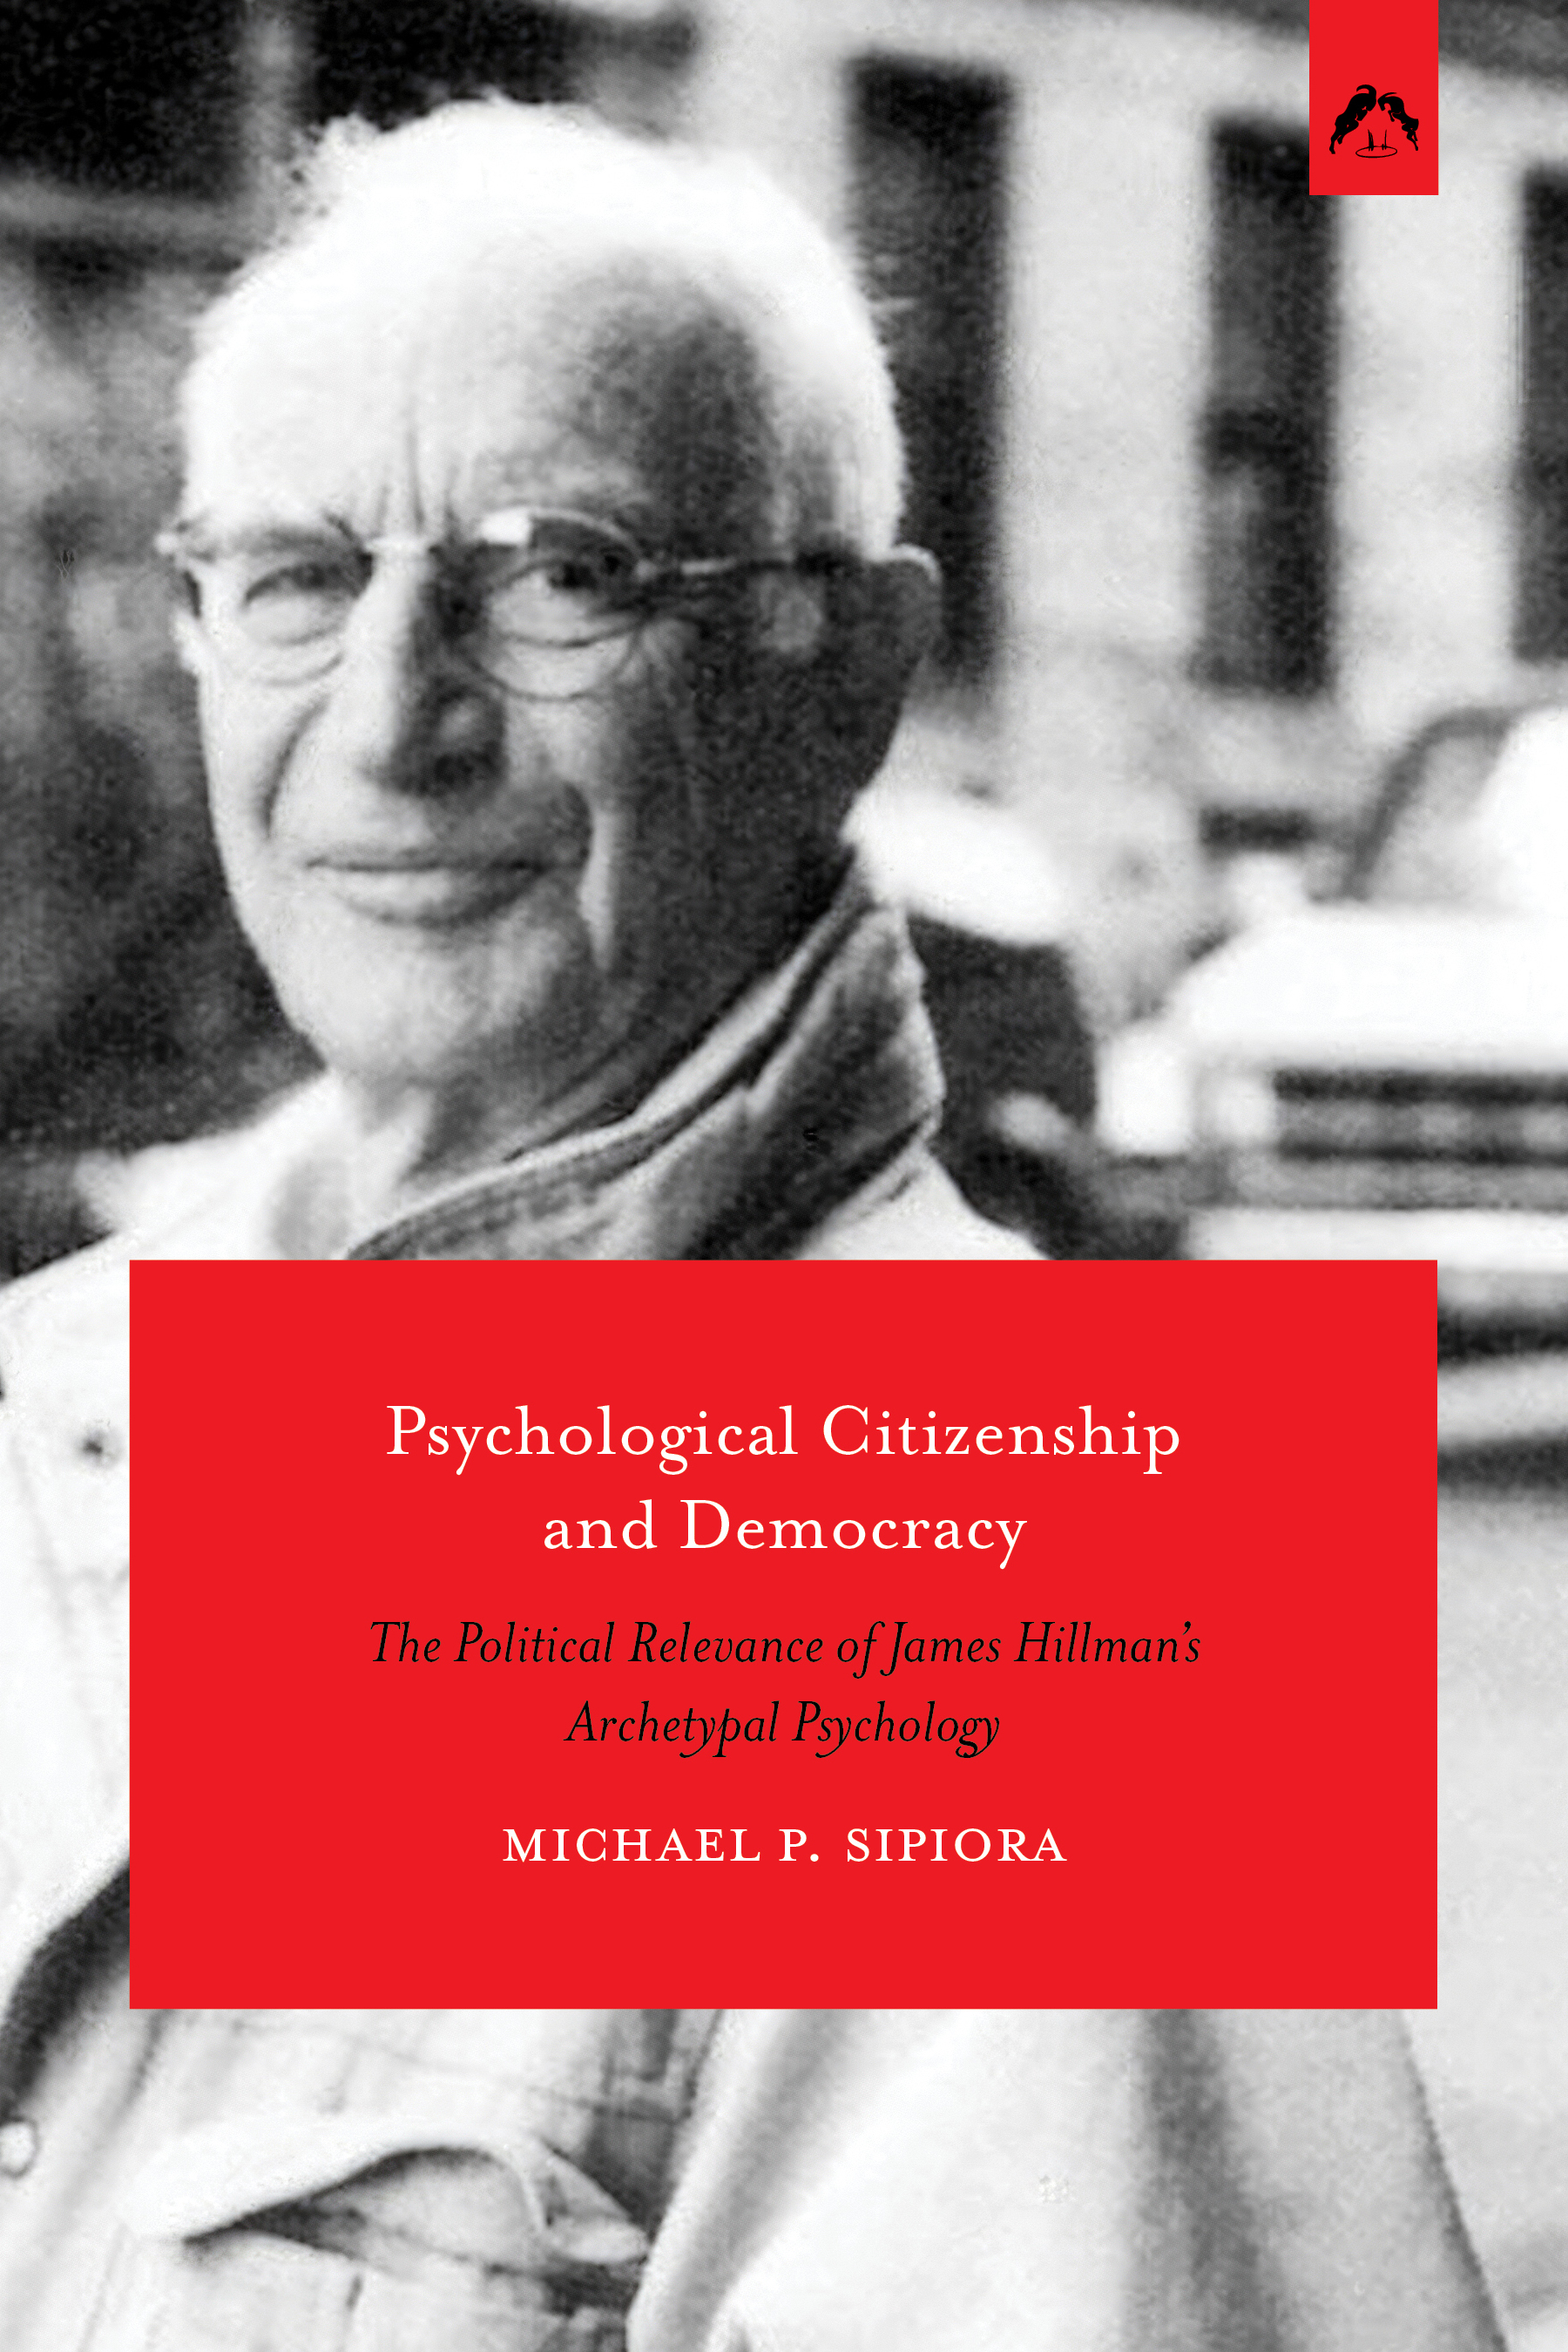 Cover for Psychological Citizenship with an image of James Hillman